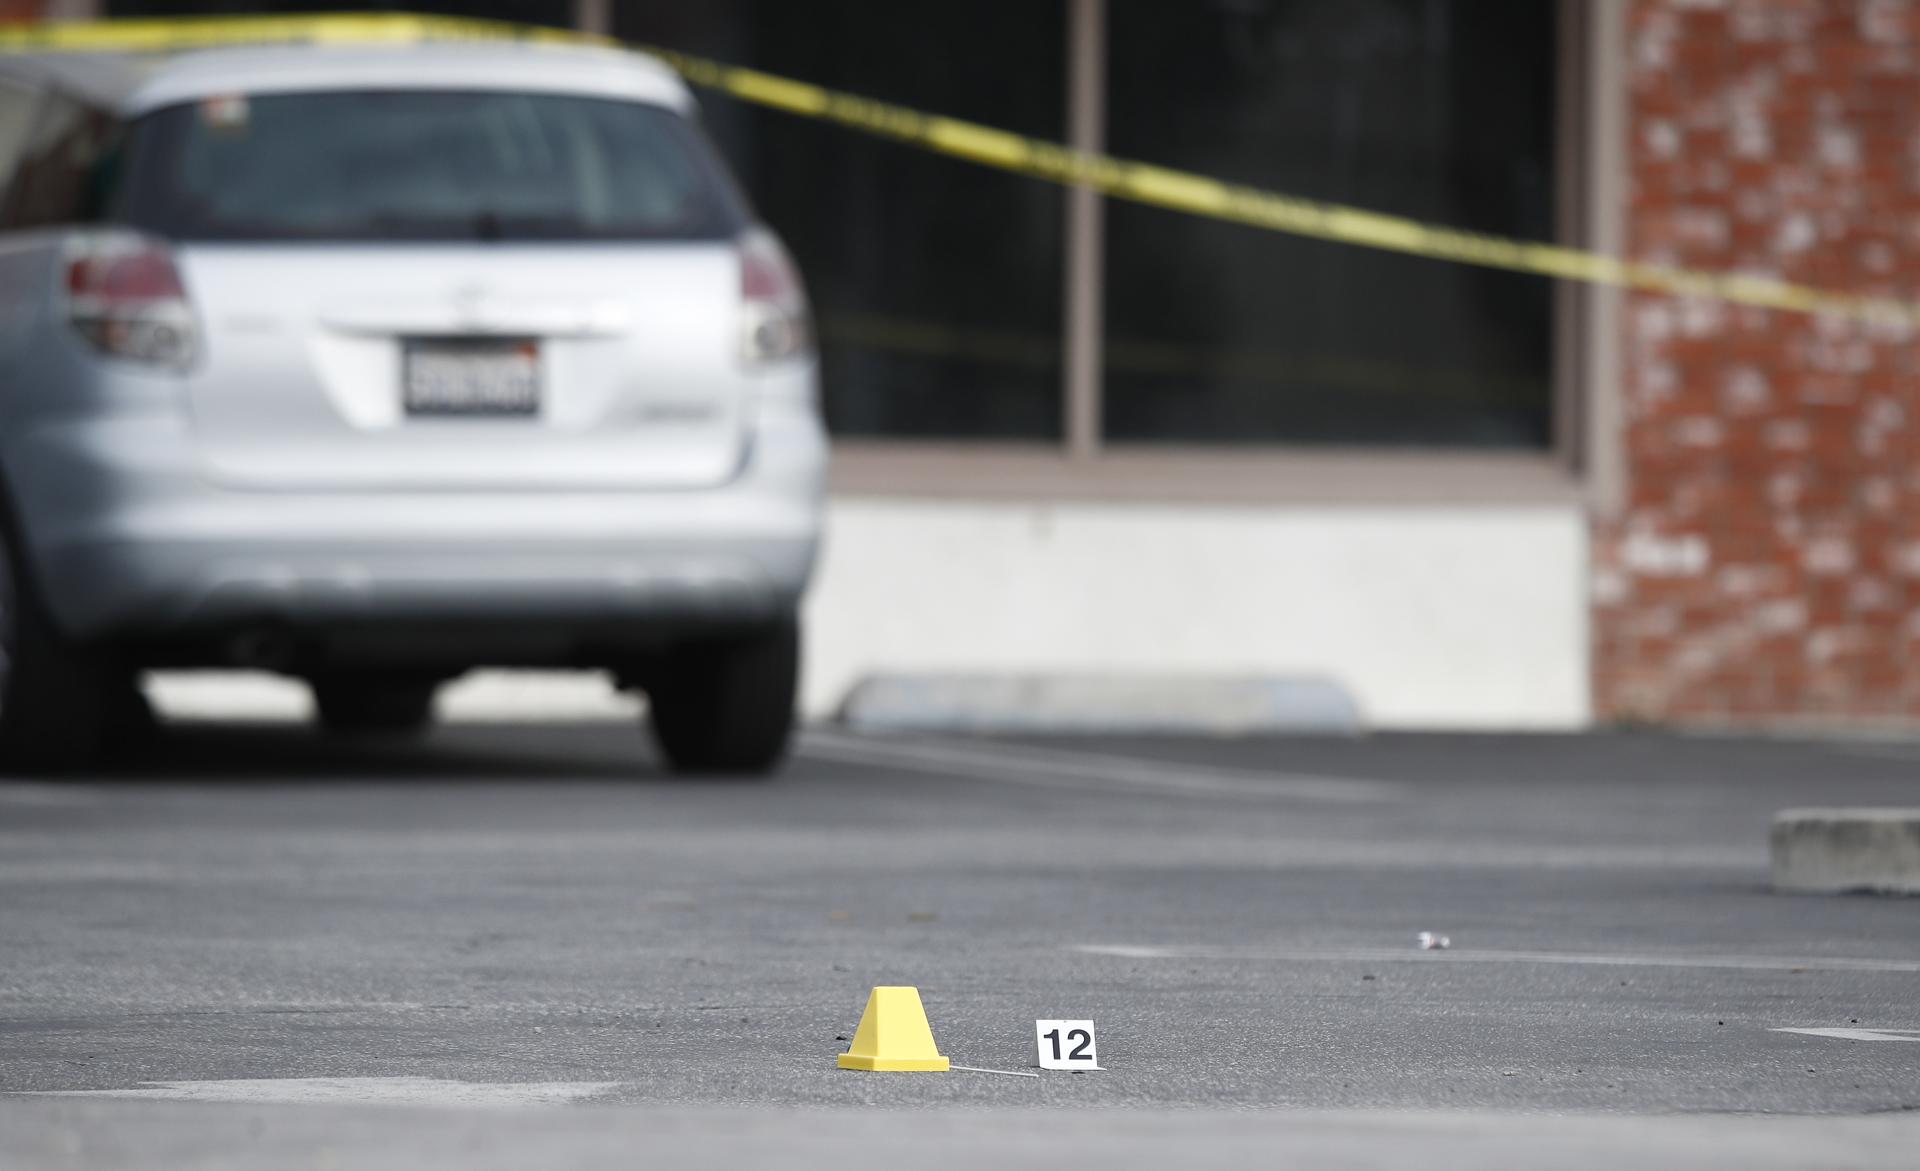 File photo of the scene of a shooting somewhere in the United States. EFE/Caroline Brehman
